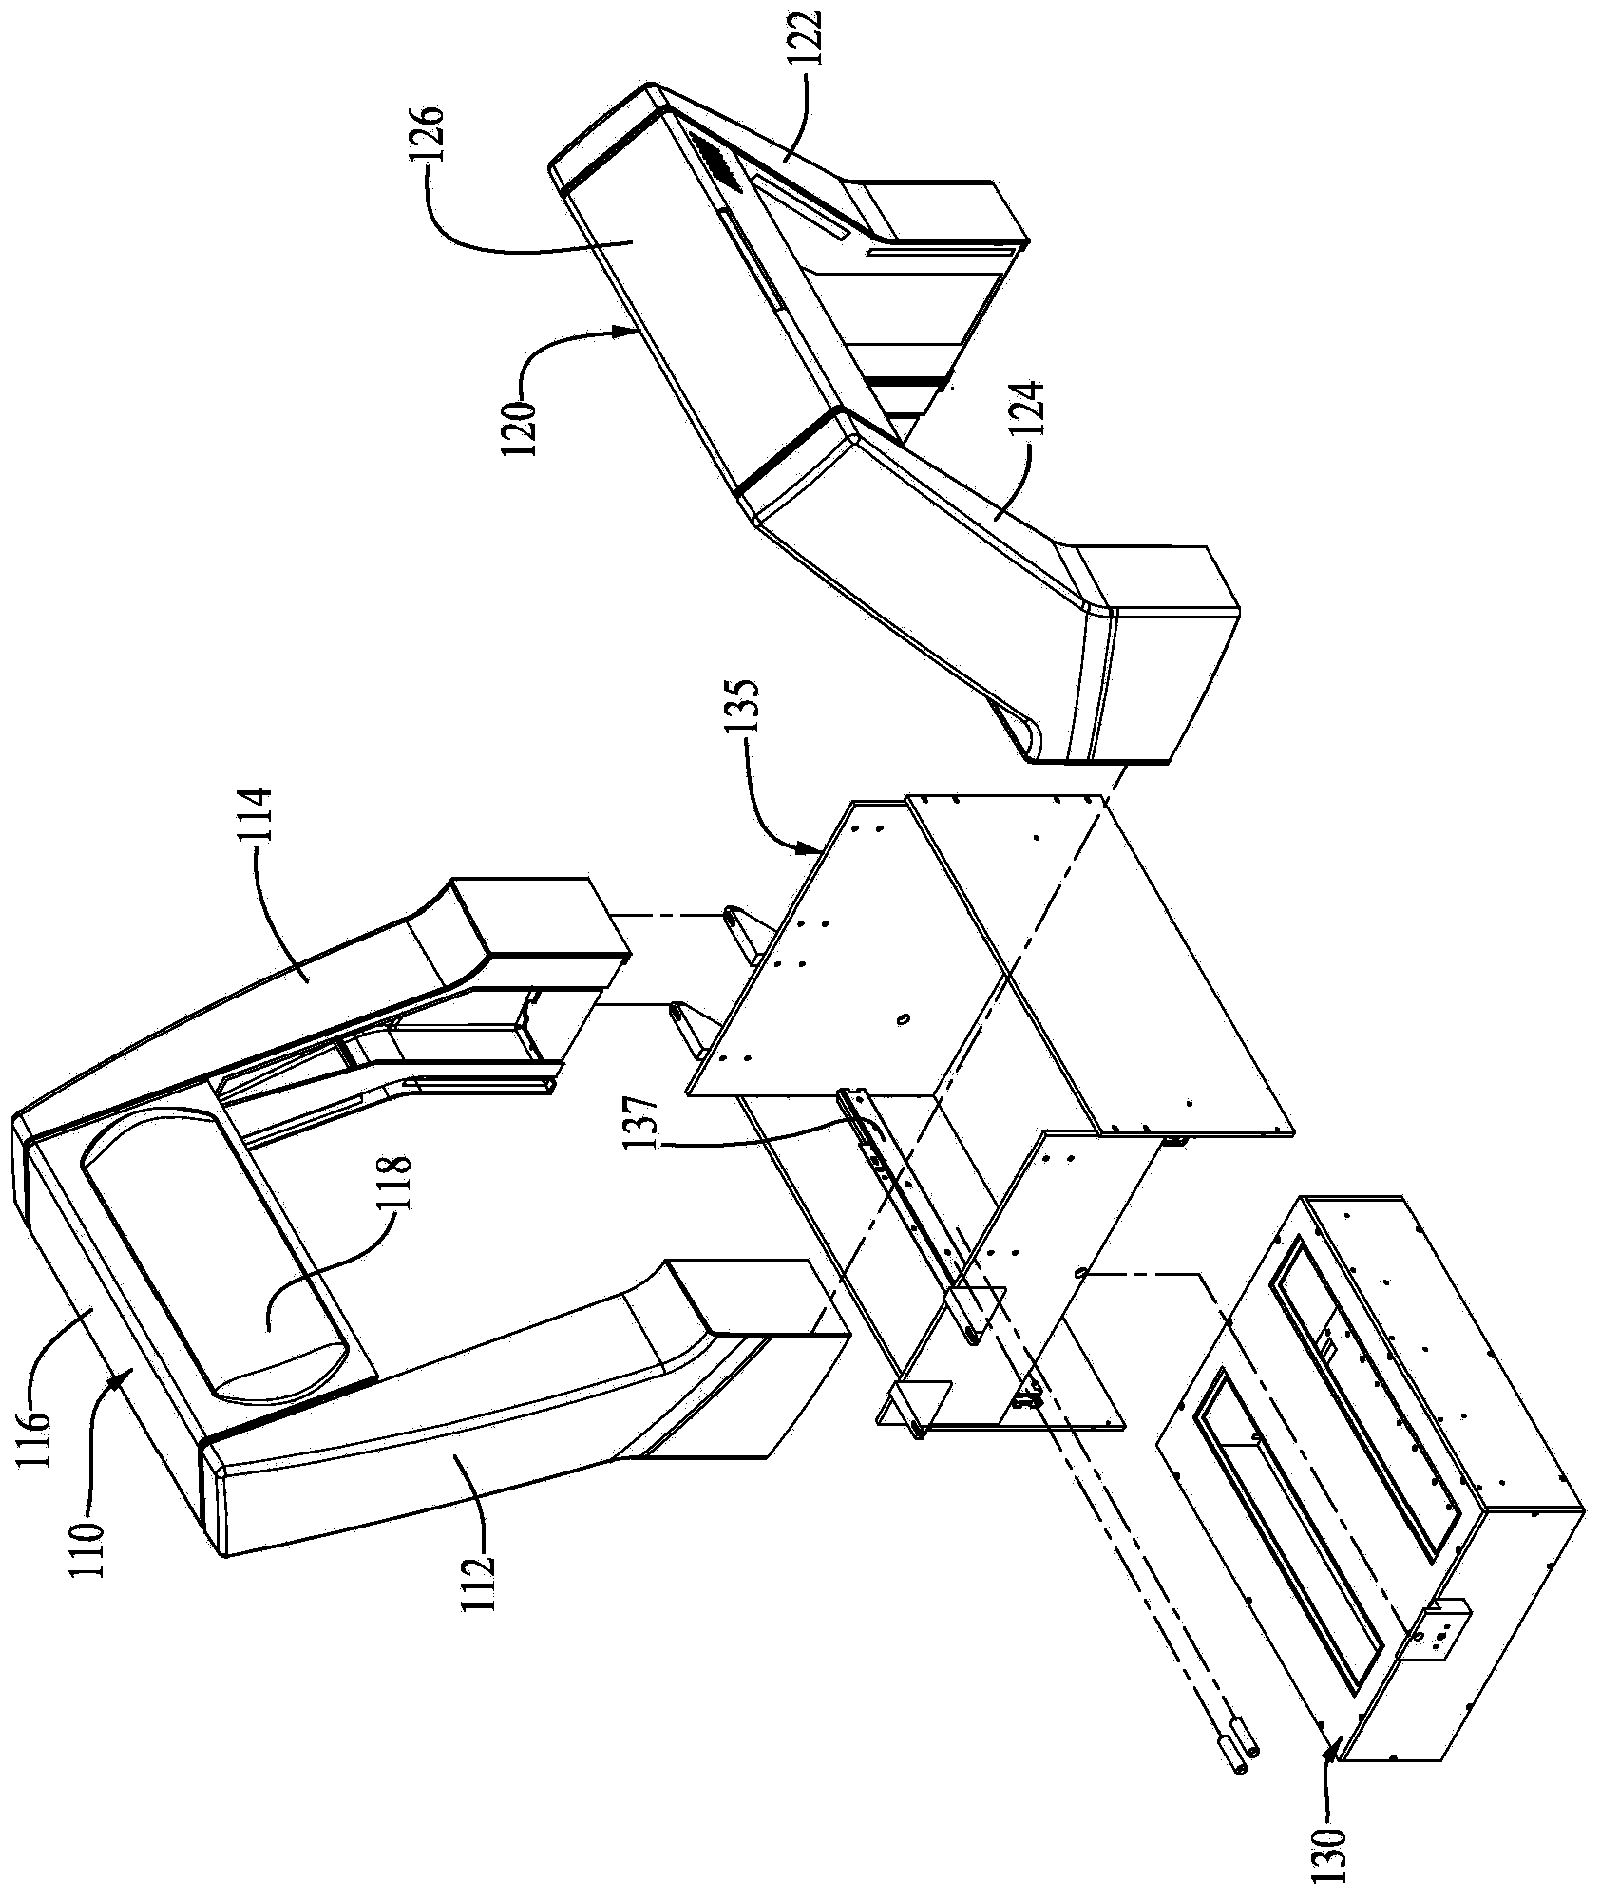 Tunnel or portal scanner and method of scanning for automated checkout